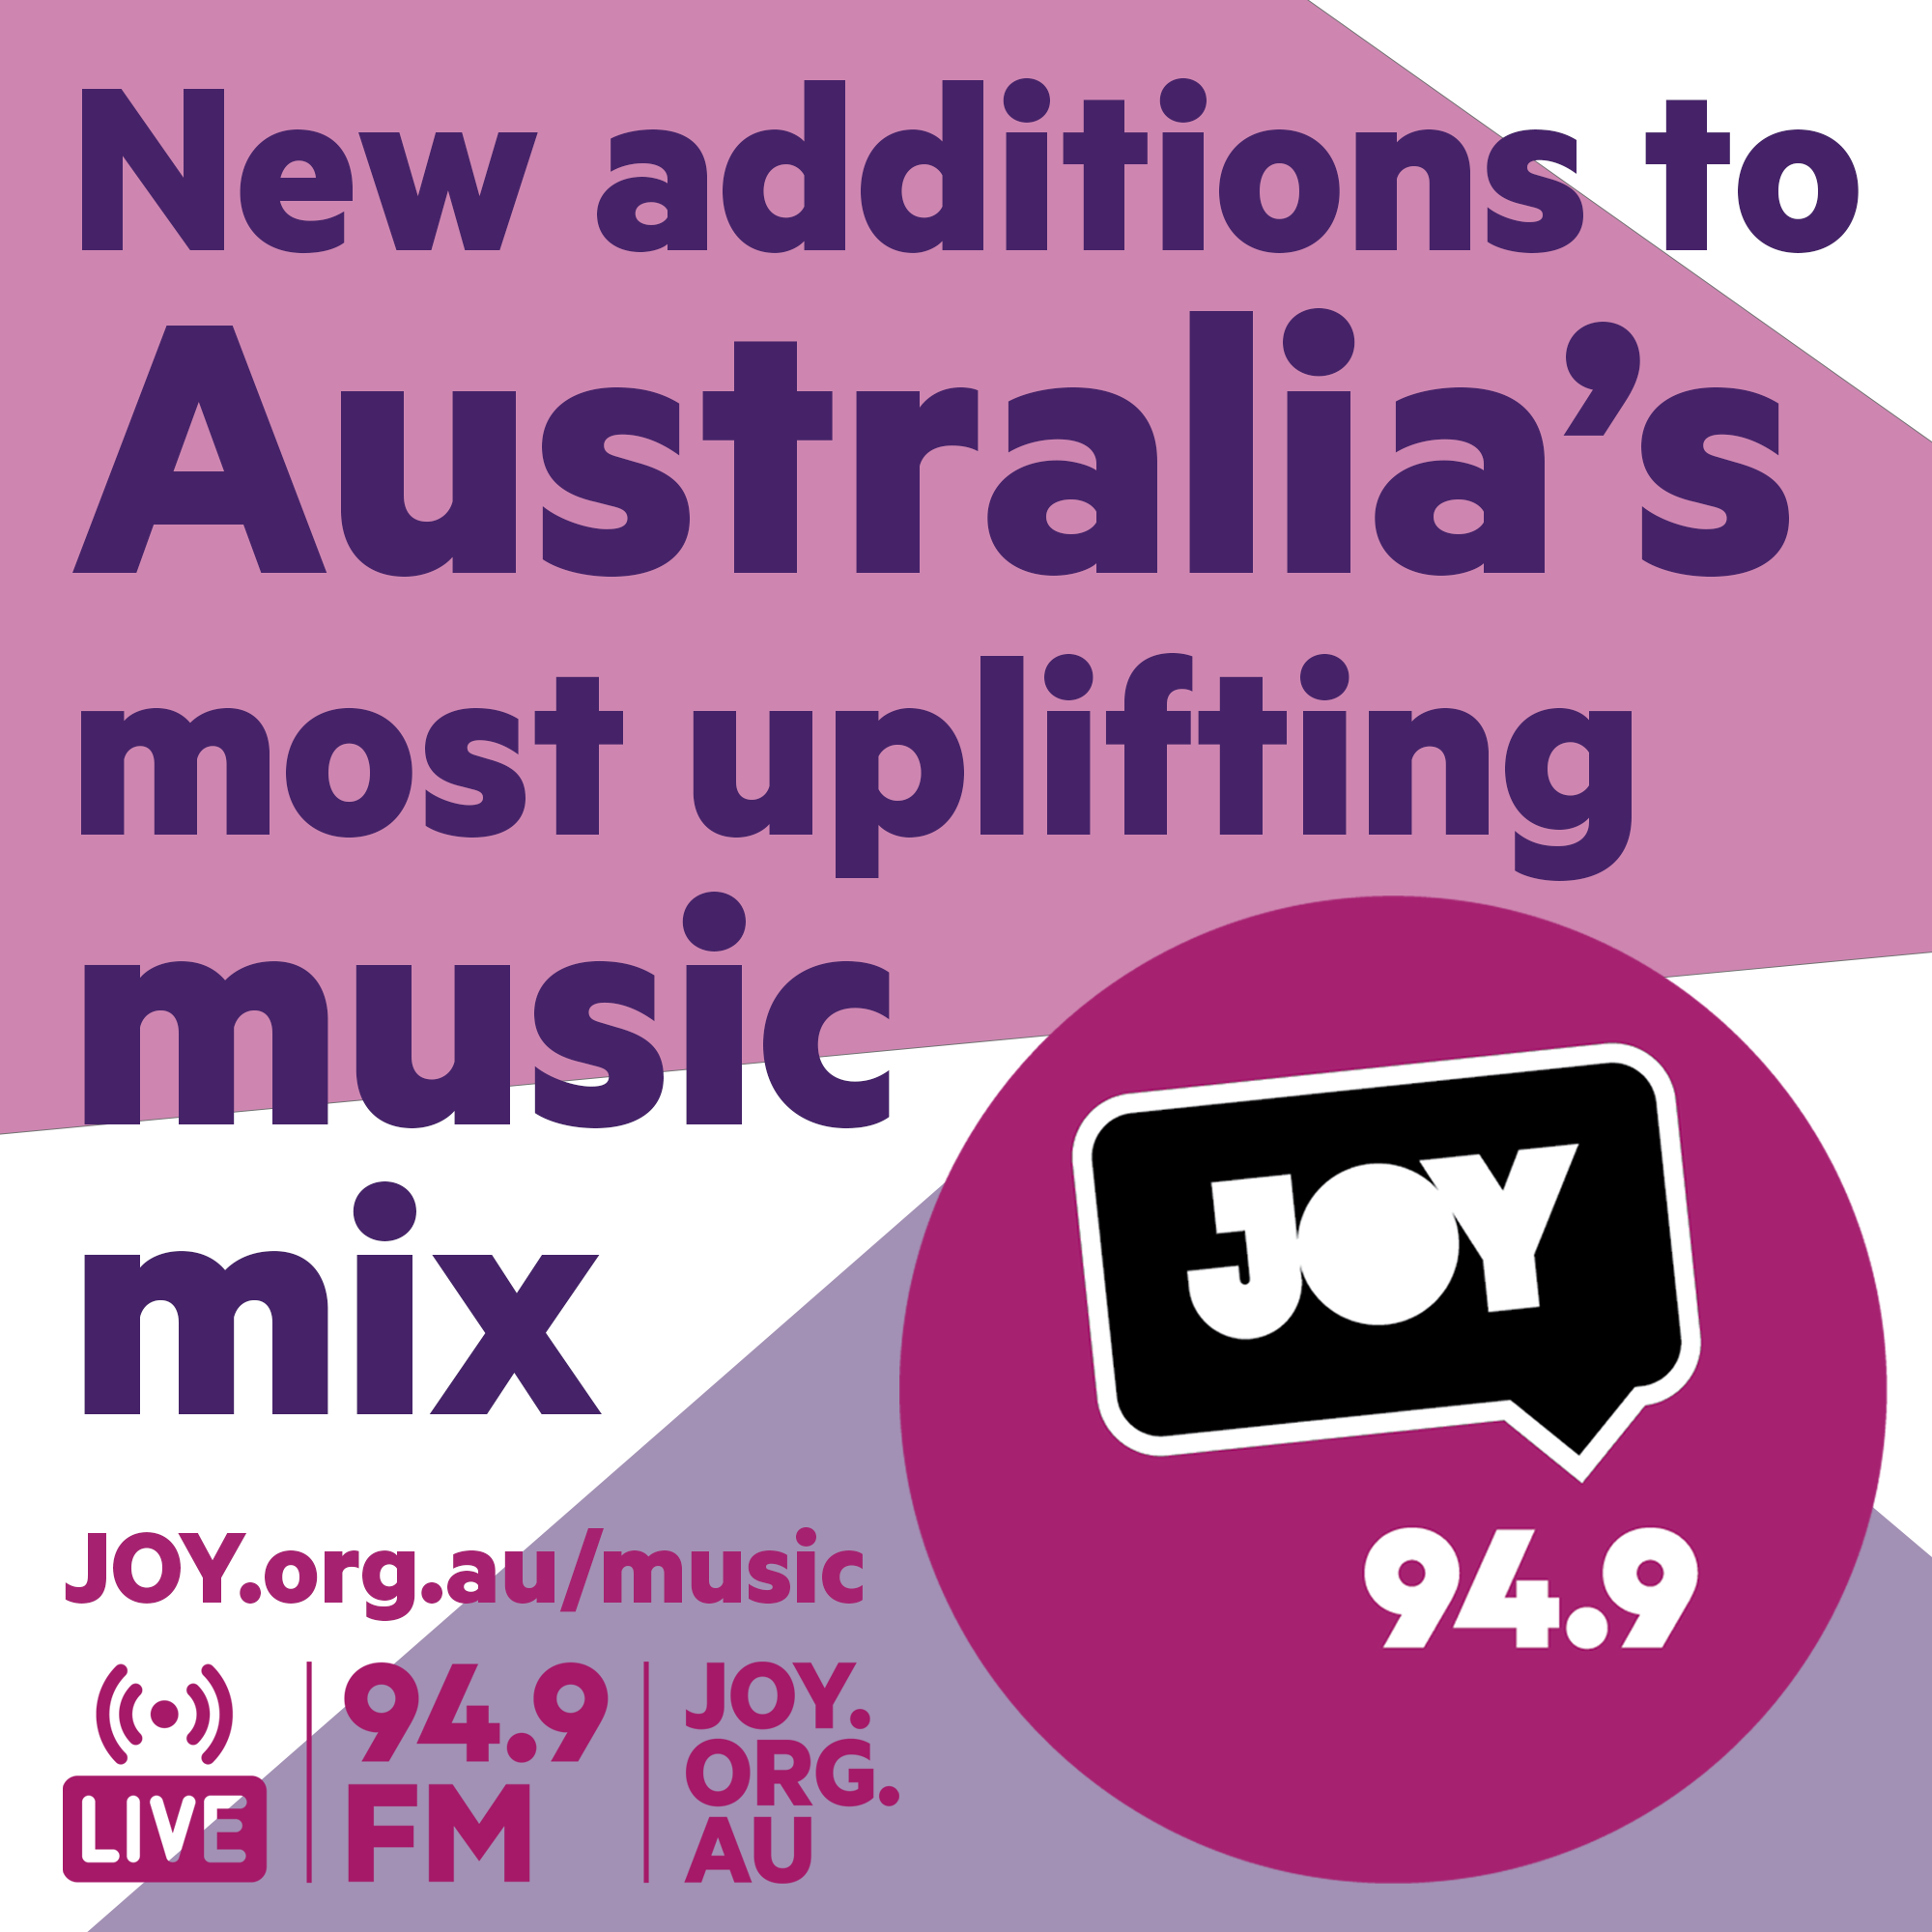 The newest songs to Australia’s most uplifting music mix: 20 April 2022